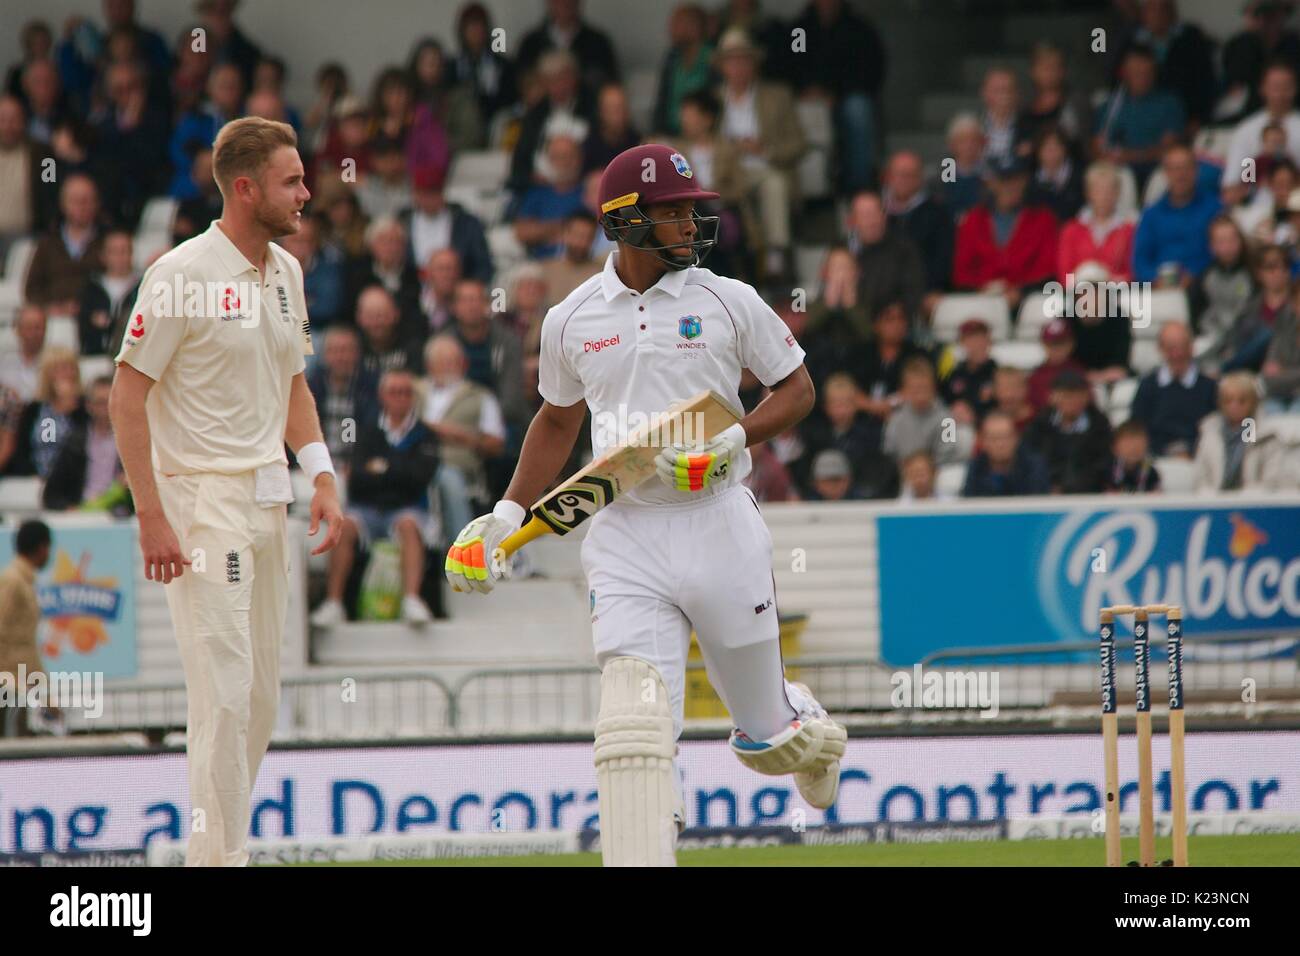 Leeds, UK. 29th Aug, 2017. Kieron Powell of the West Indies running a single past England bowler Stuart Broad on the final day of the second Investec Test Match at Headingley Cricket Ground. Credit: Colin Edwards/Alamy Live News Stock Photo